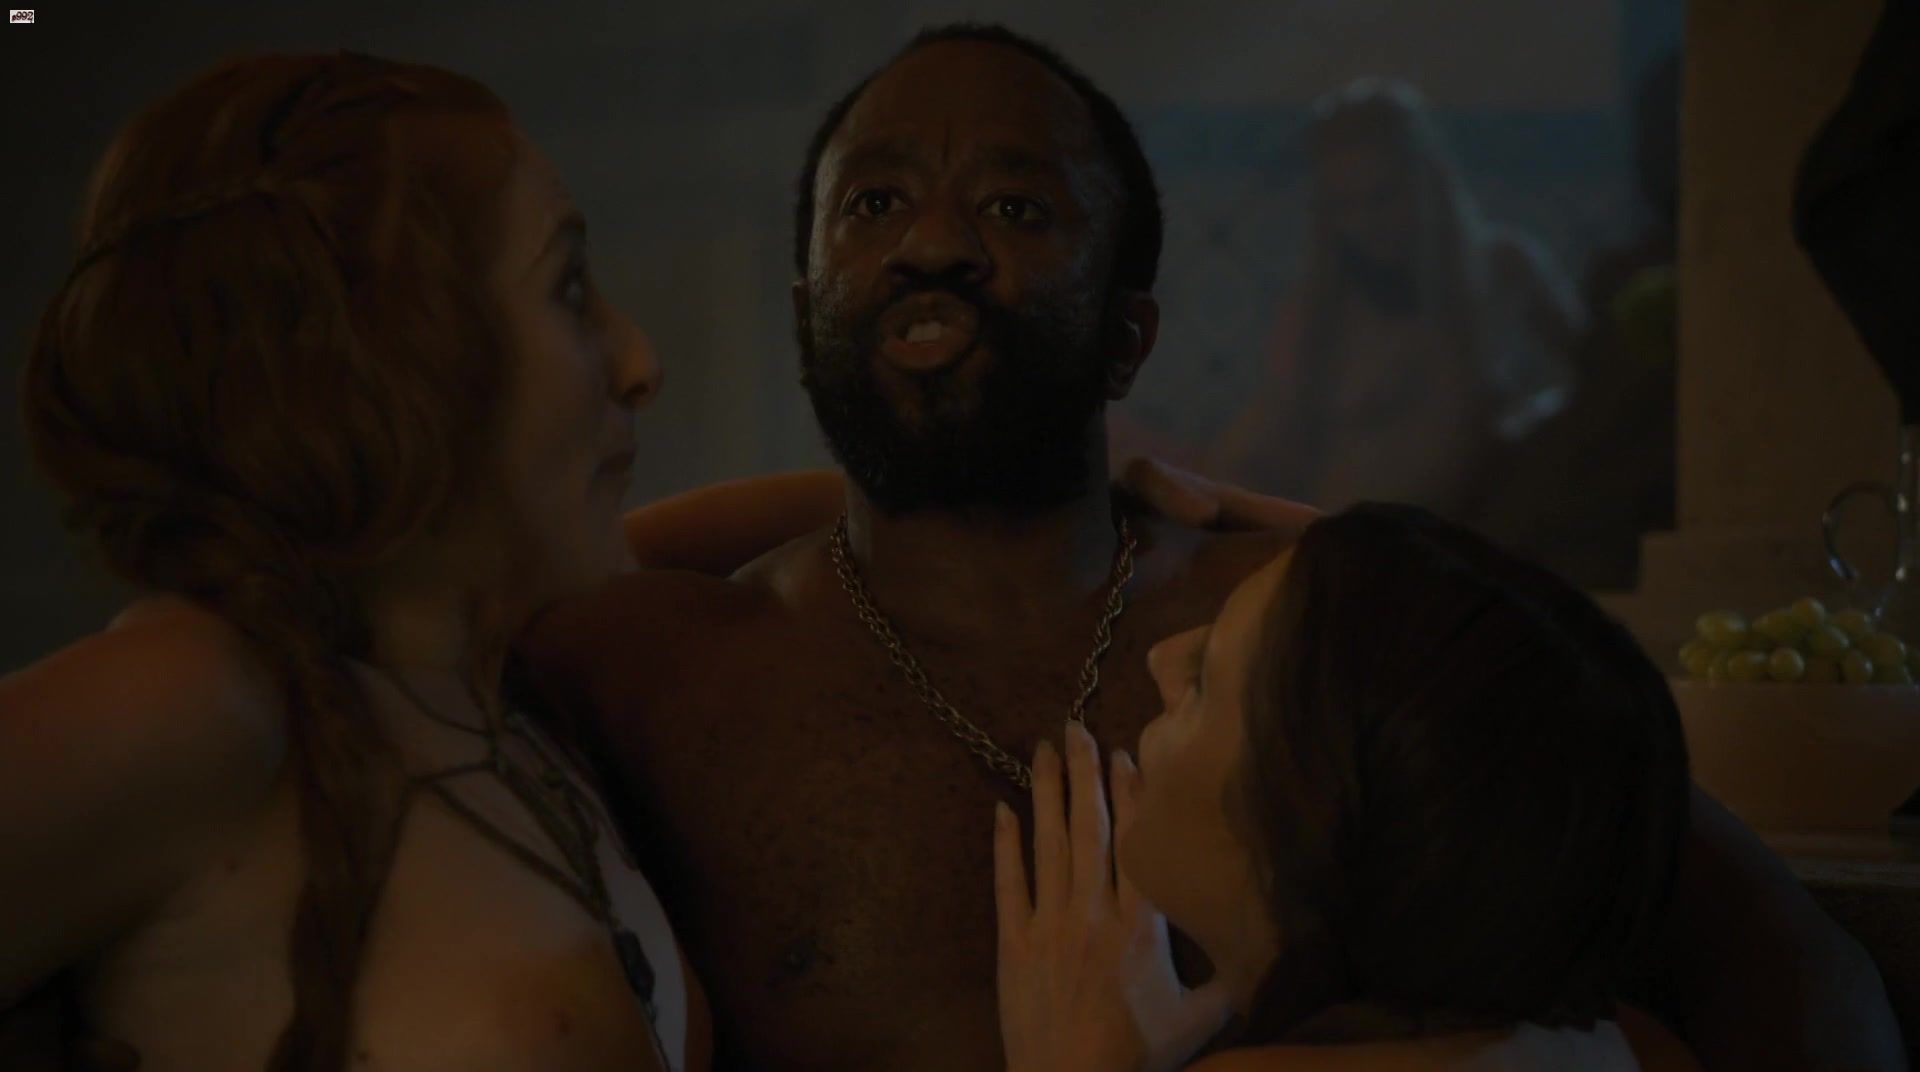 Natural Boobs Sarine Sofair nude Charlotte Hope - GAME OF THRONES (S04 E06) Grandmother